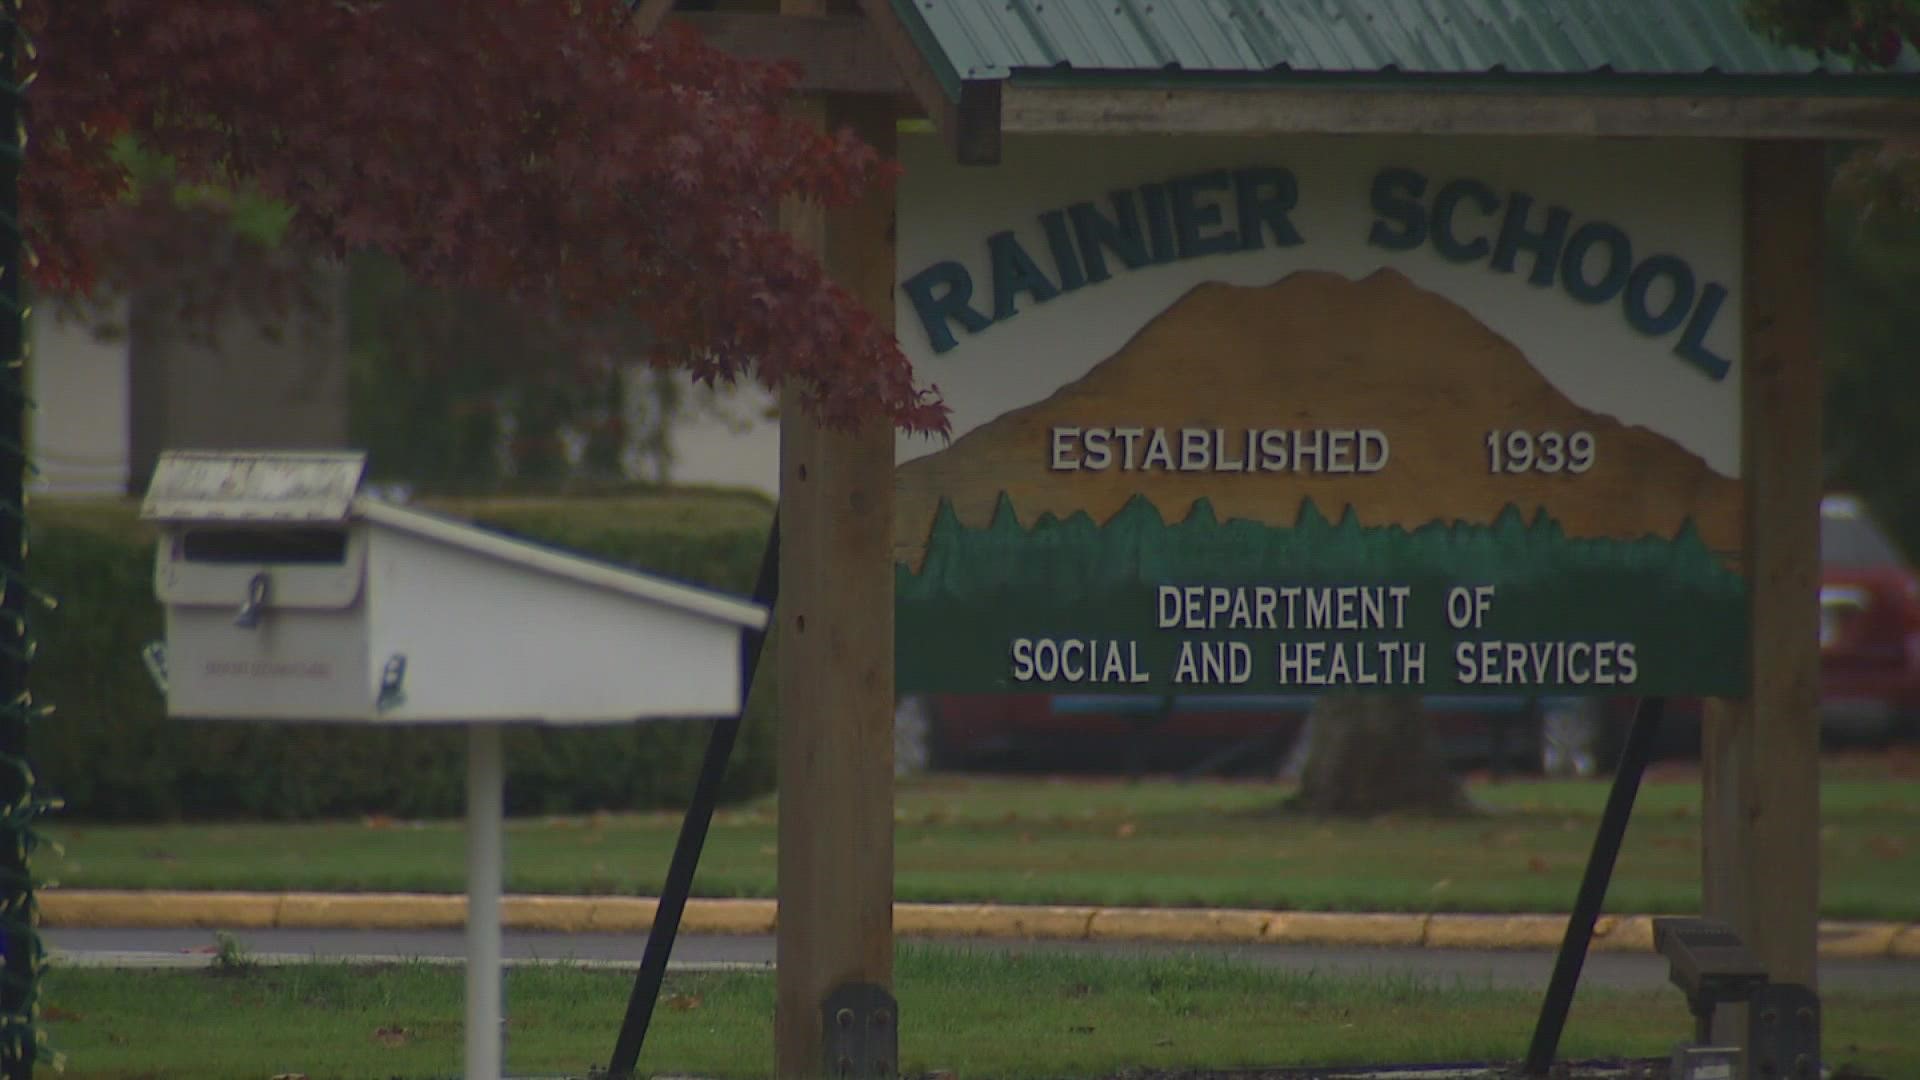 The family lodged a complaint against the Rainier School, stating their family member was neglected and not given adequate care.